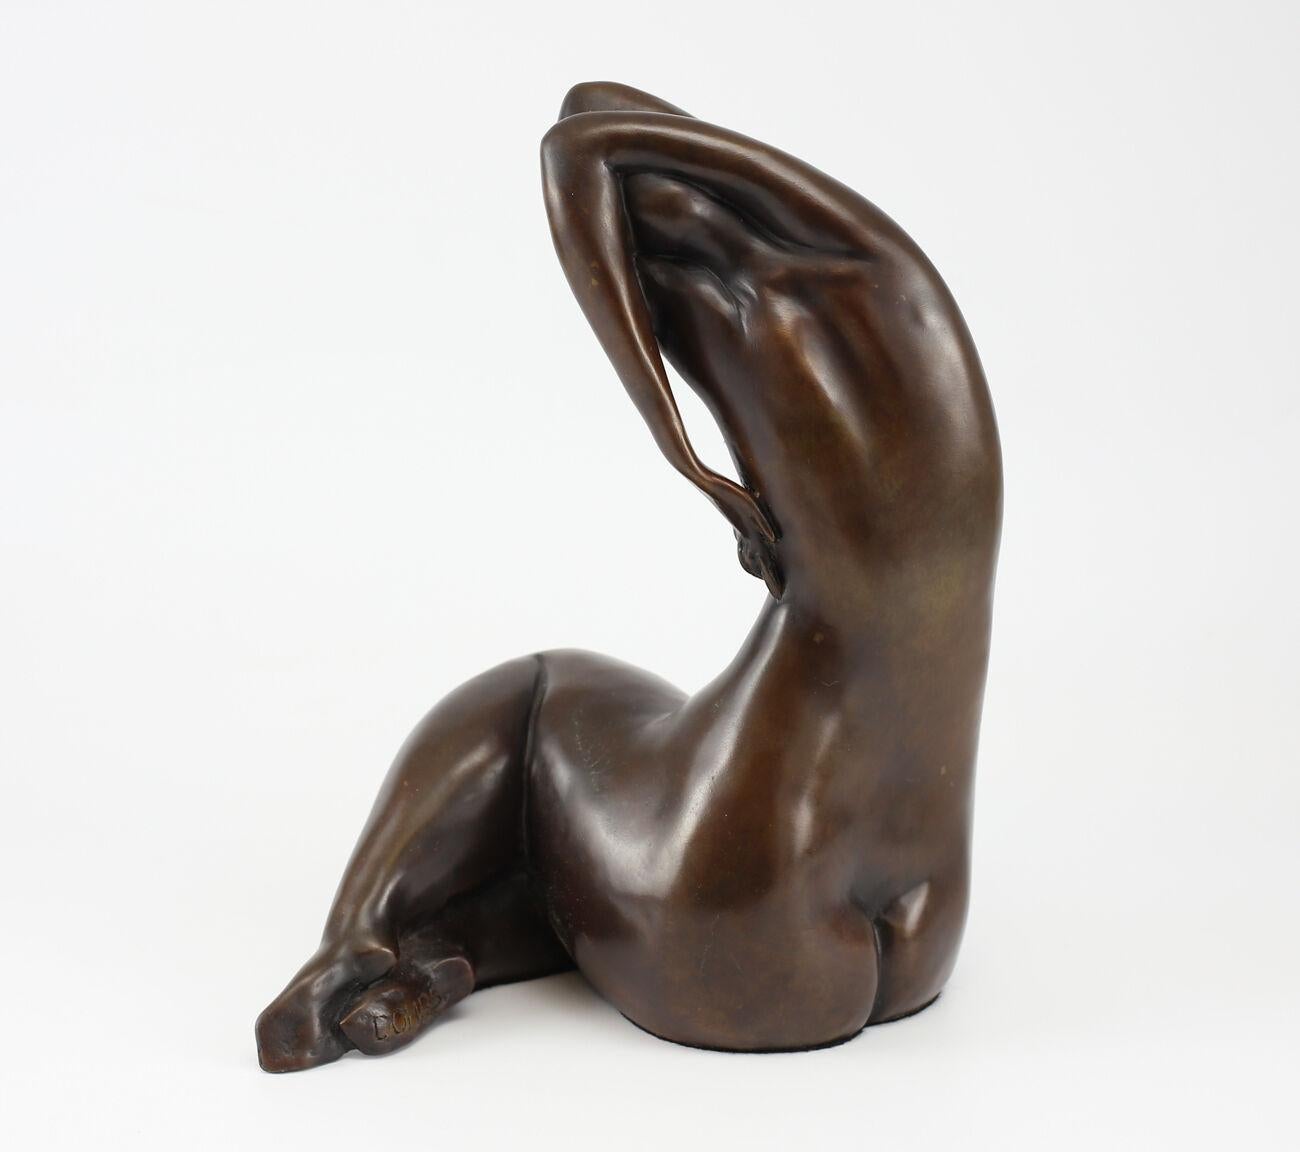 Dohrs, Marjorie Bronze Seated Nude Female, Modernist

Dohrs, Marjorie (American, 20th century) Bronze patinated, seated nude female figure, arms raised and framing head, abstract modernist style sculpture. Signed ' DOHRS' on bottom of